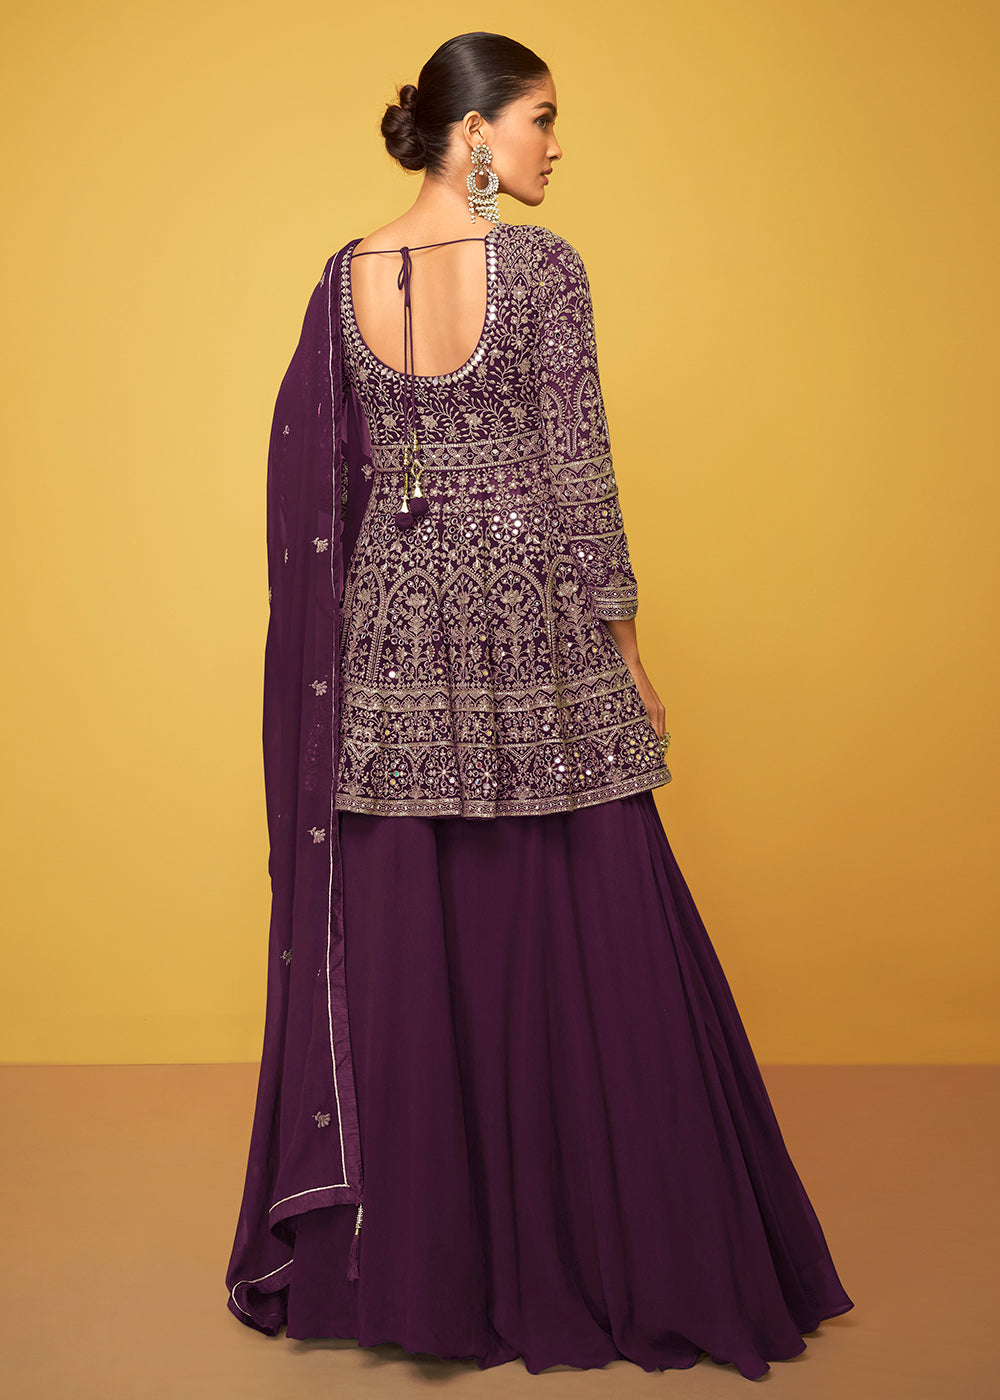 Buy Now Glorious Purple Georgette Fabric Skirt Style Designer Palazzo Suit Online in USA, UK, Canada & Worldwide at Empress Clothing. 